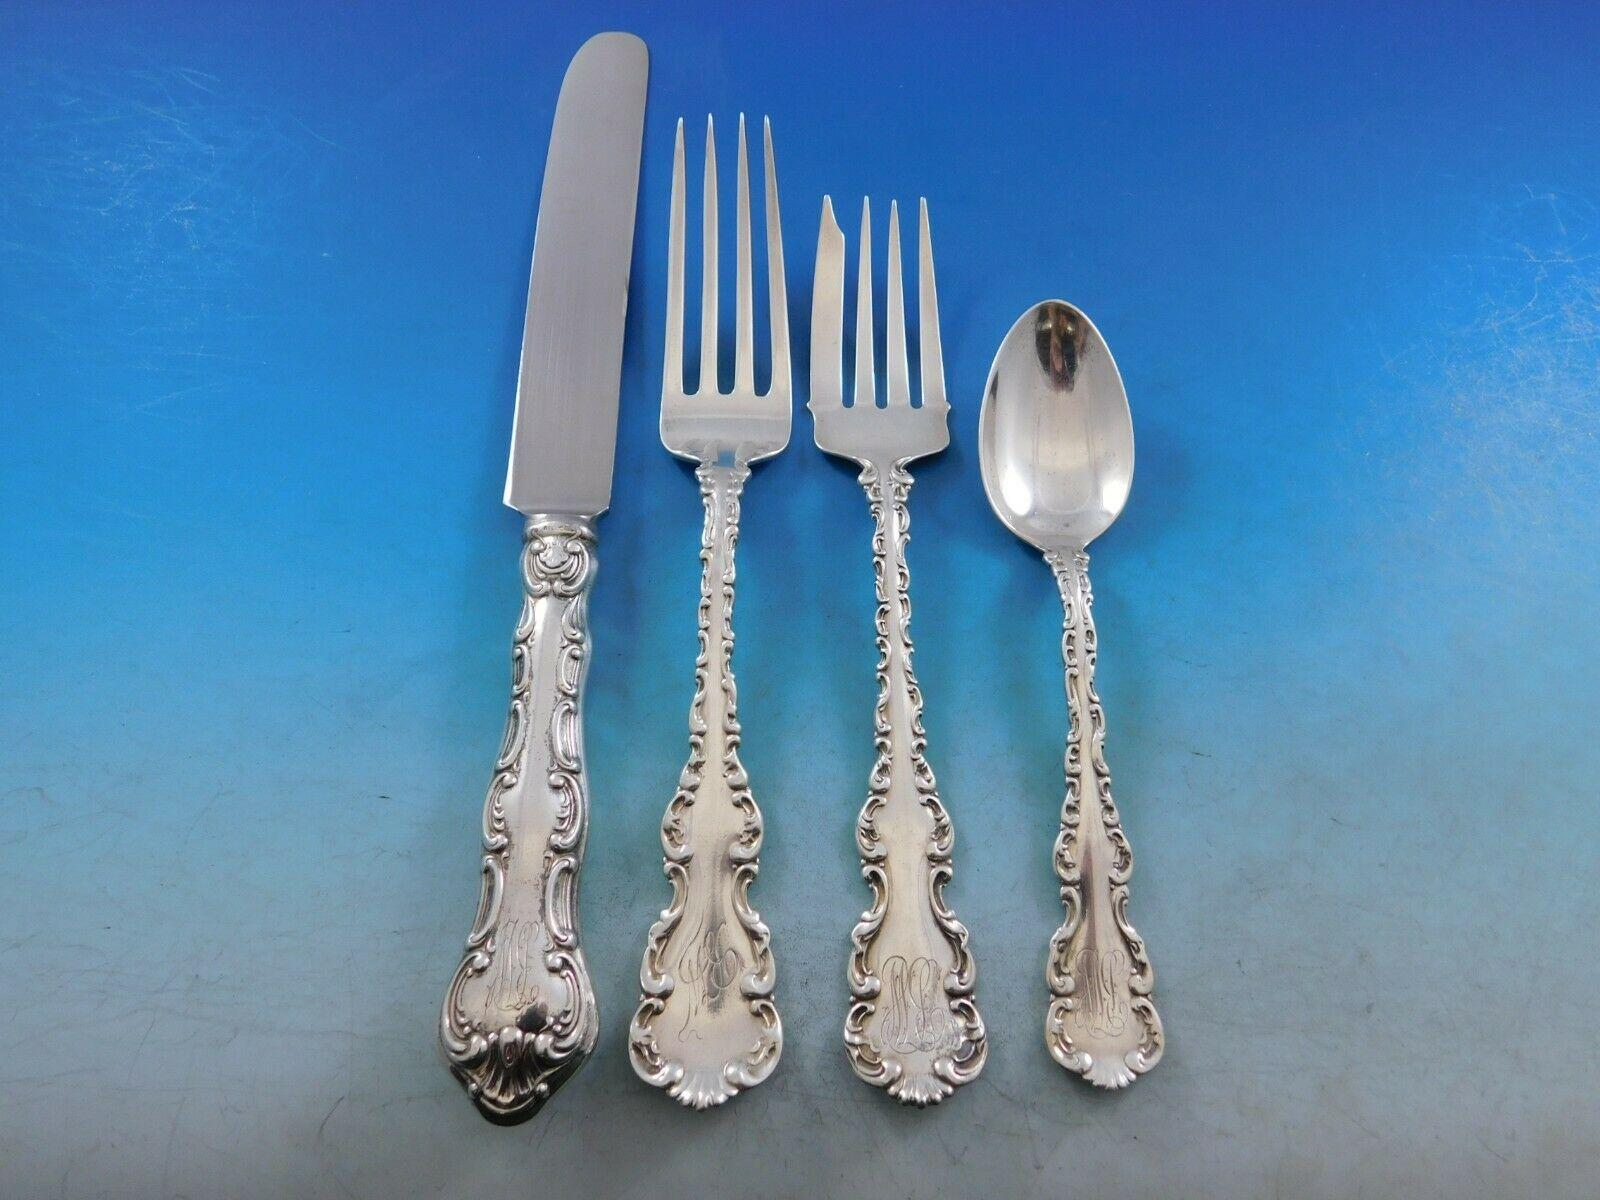 Dinner size Louis XV by whiting sterling silver flatware set, 86 pieces (with Strasbourg knives). This set includes:

12 Dinner size knives, 9 1/2